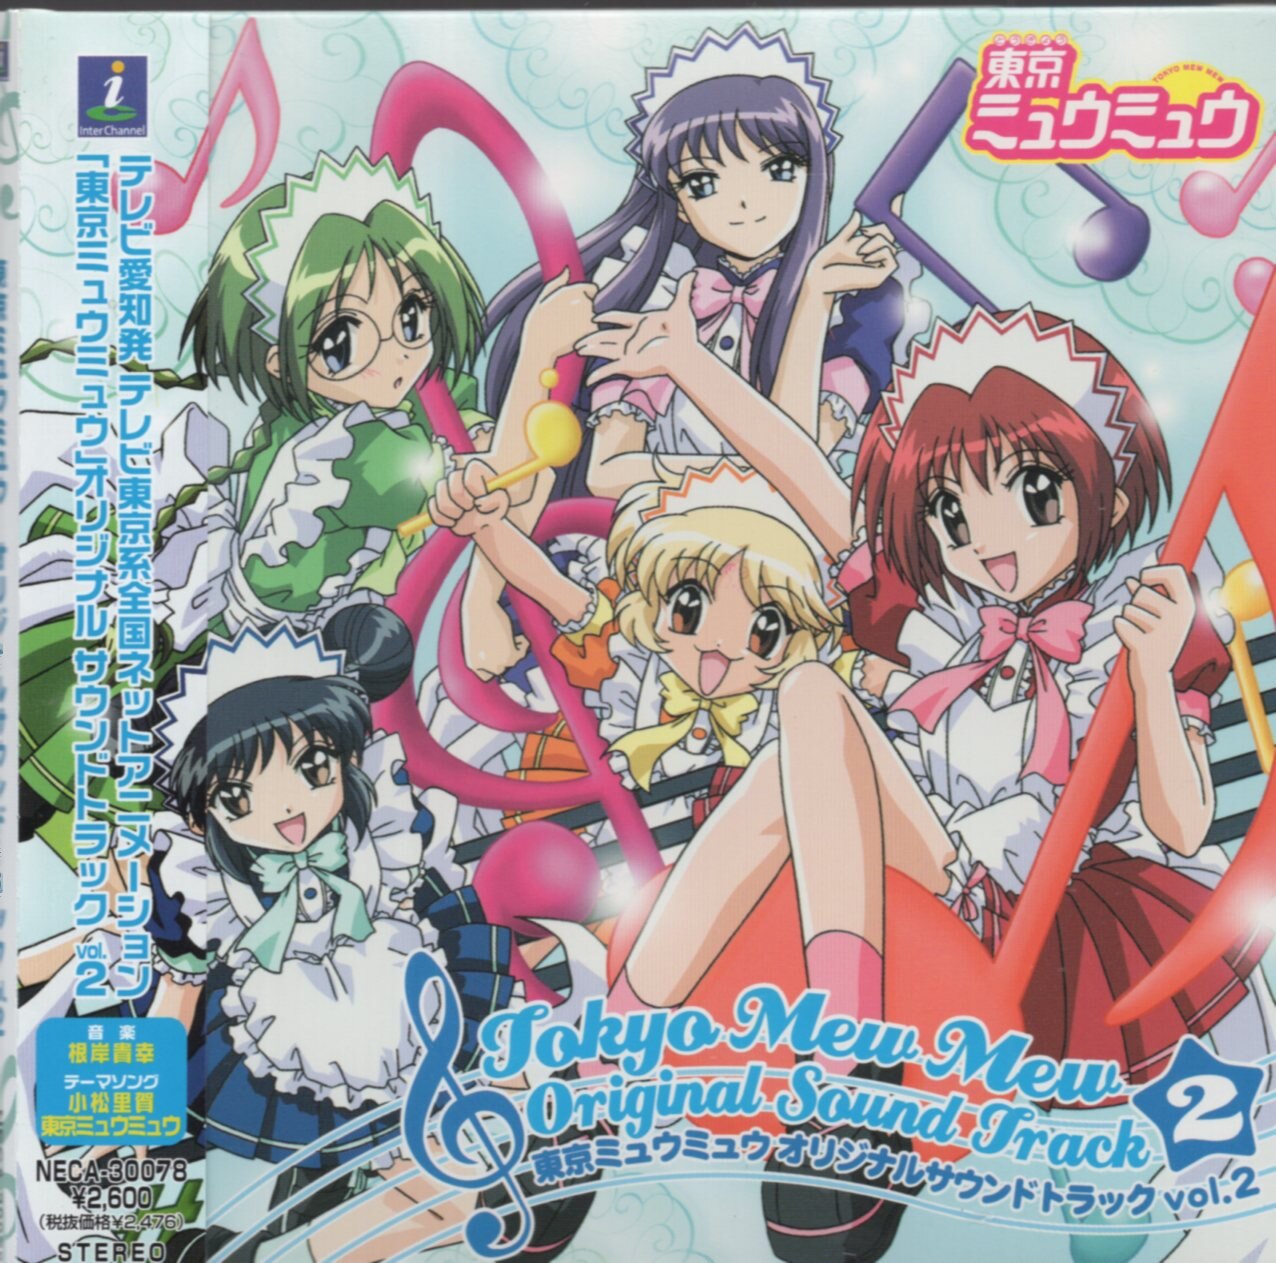 Tokyo Mew Mew New Official Visual Book w/ TV Animation Tokyo Mew Mew  Memorial Book